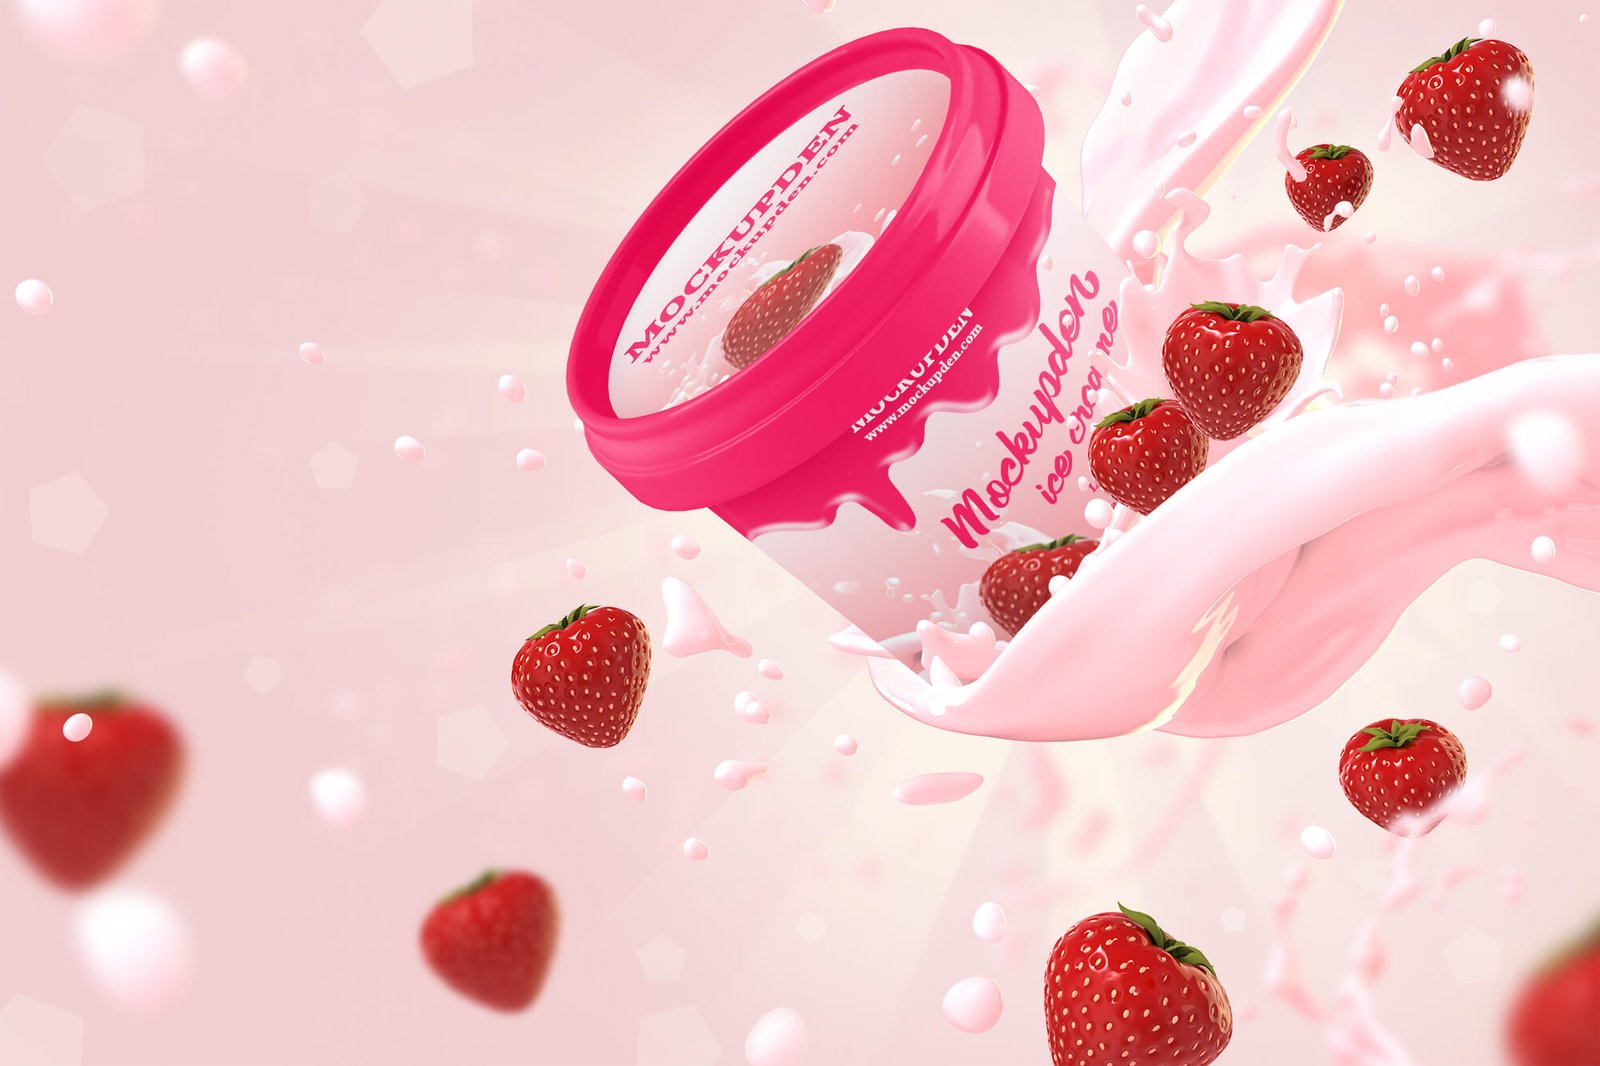 Download Free Strawberry Ice Cream Jar Mockup PSD Template: Exclusive